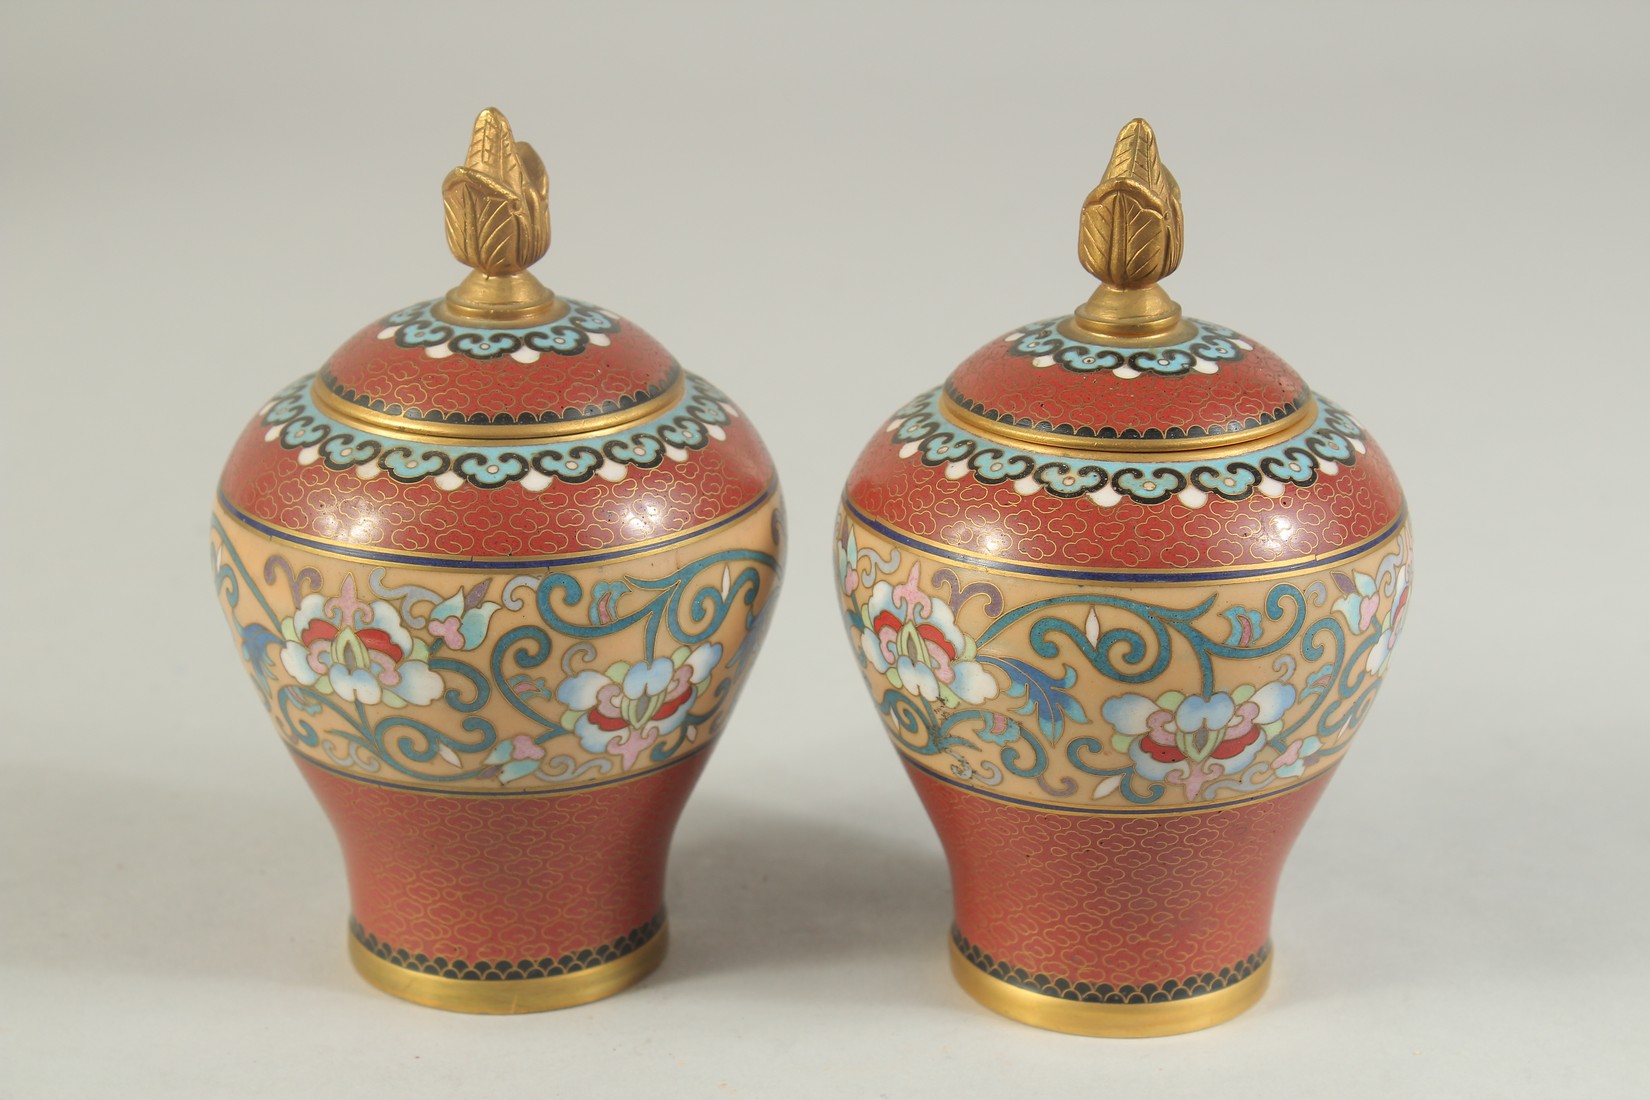 A PAIR OF MID 20TH CENTURY CHINESE CLOISONNE LIDDED JARS, each with a central band of foliate - Image 4 of 7